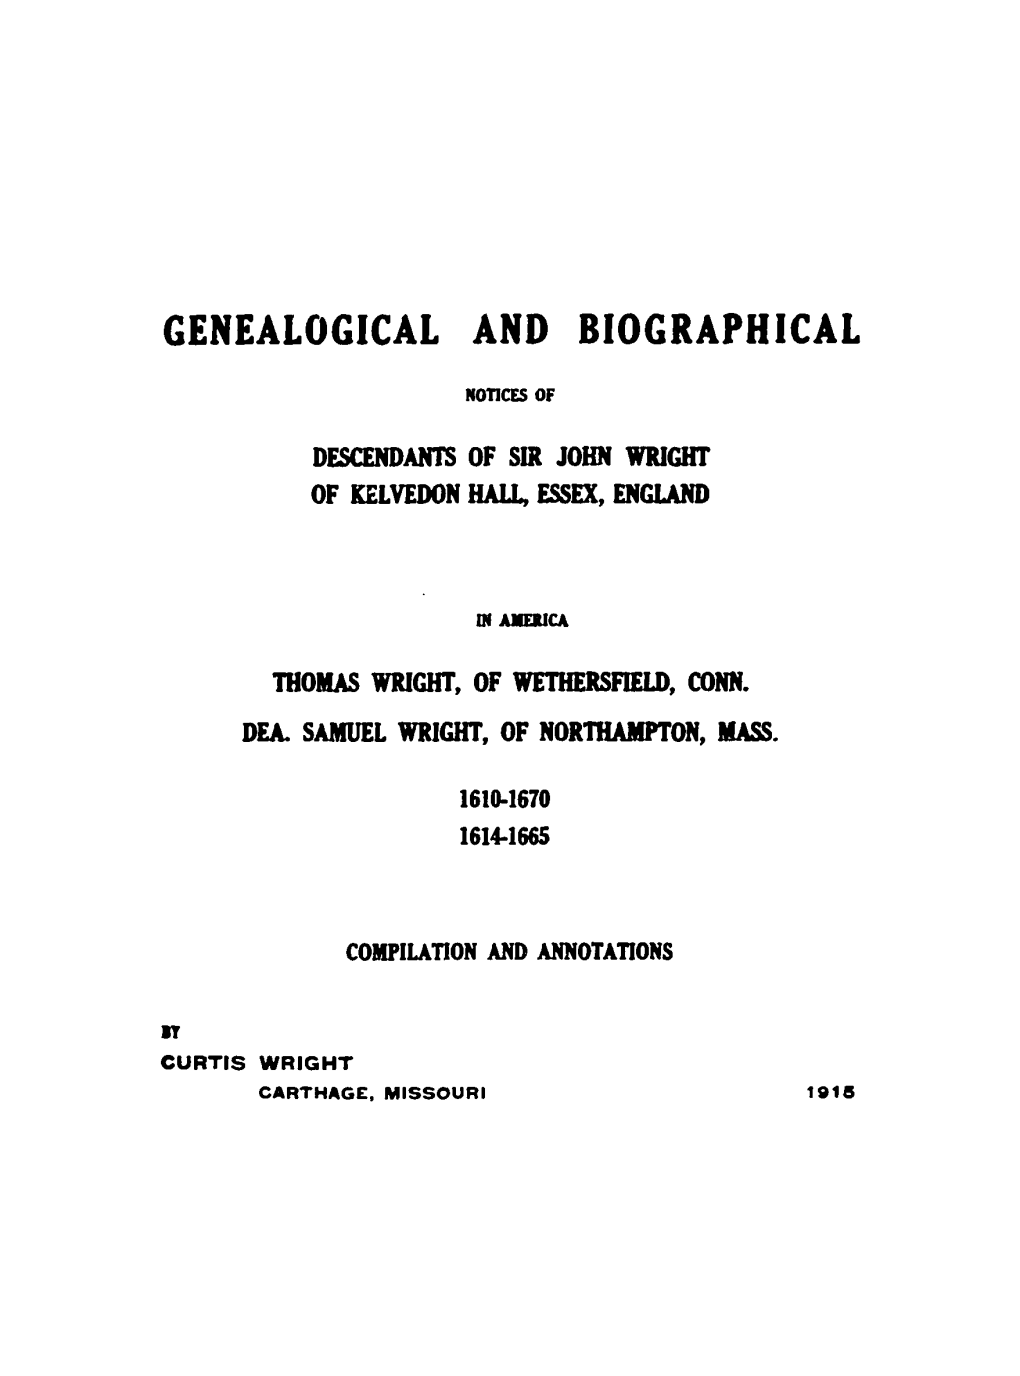 Genealogical and Biographical